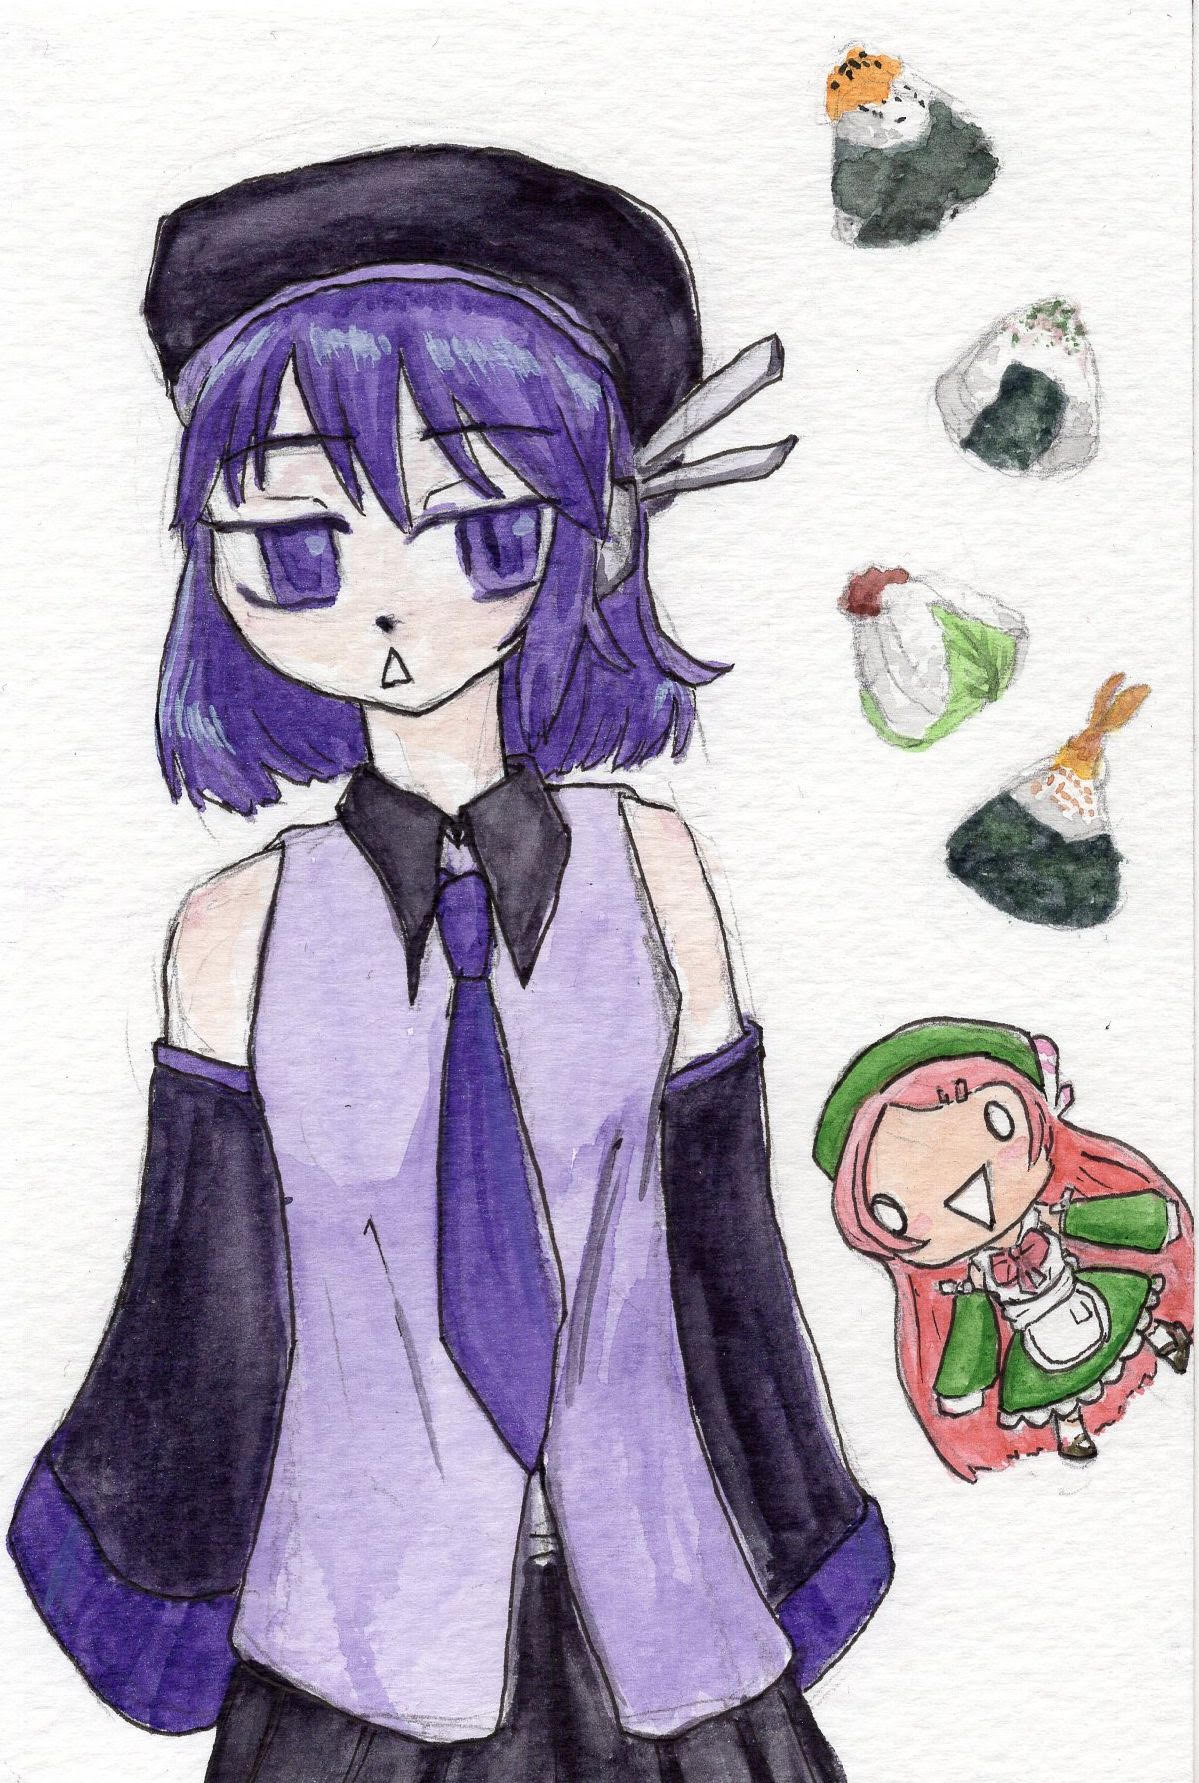 watercolor of utauloid defoko with riceballs and a chibi momone momo to the side